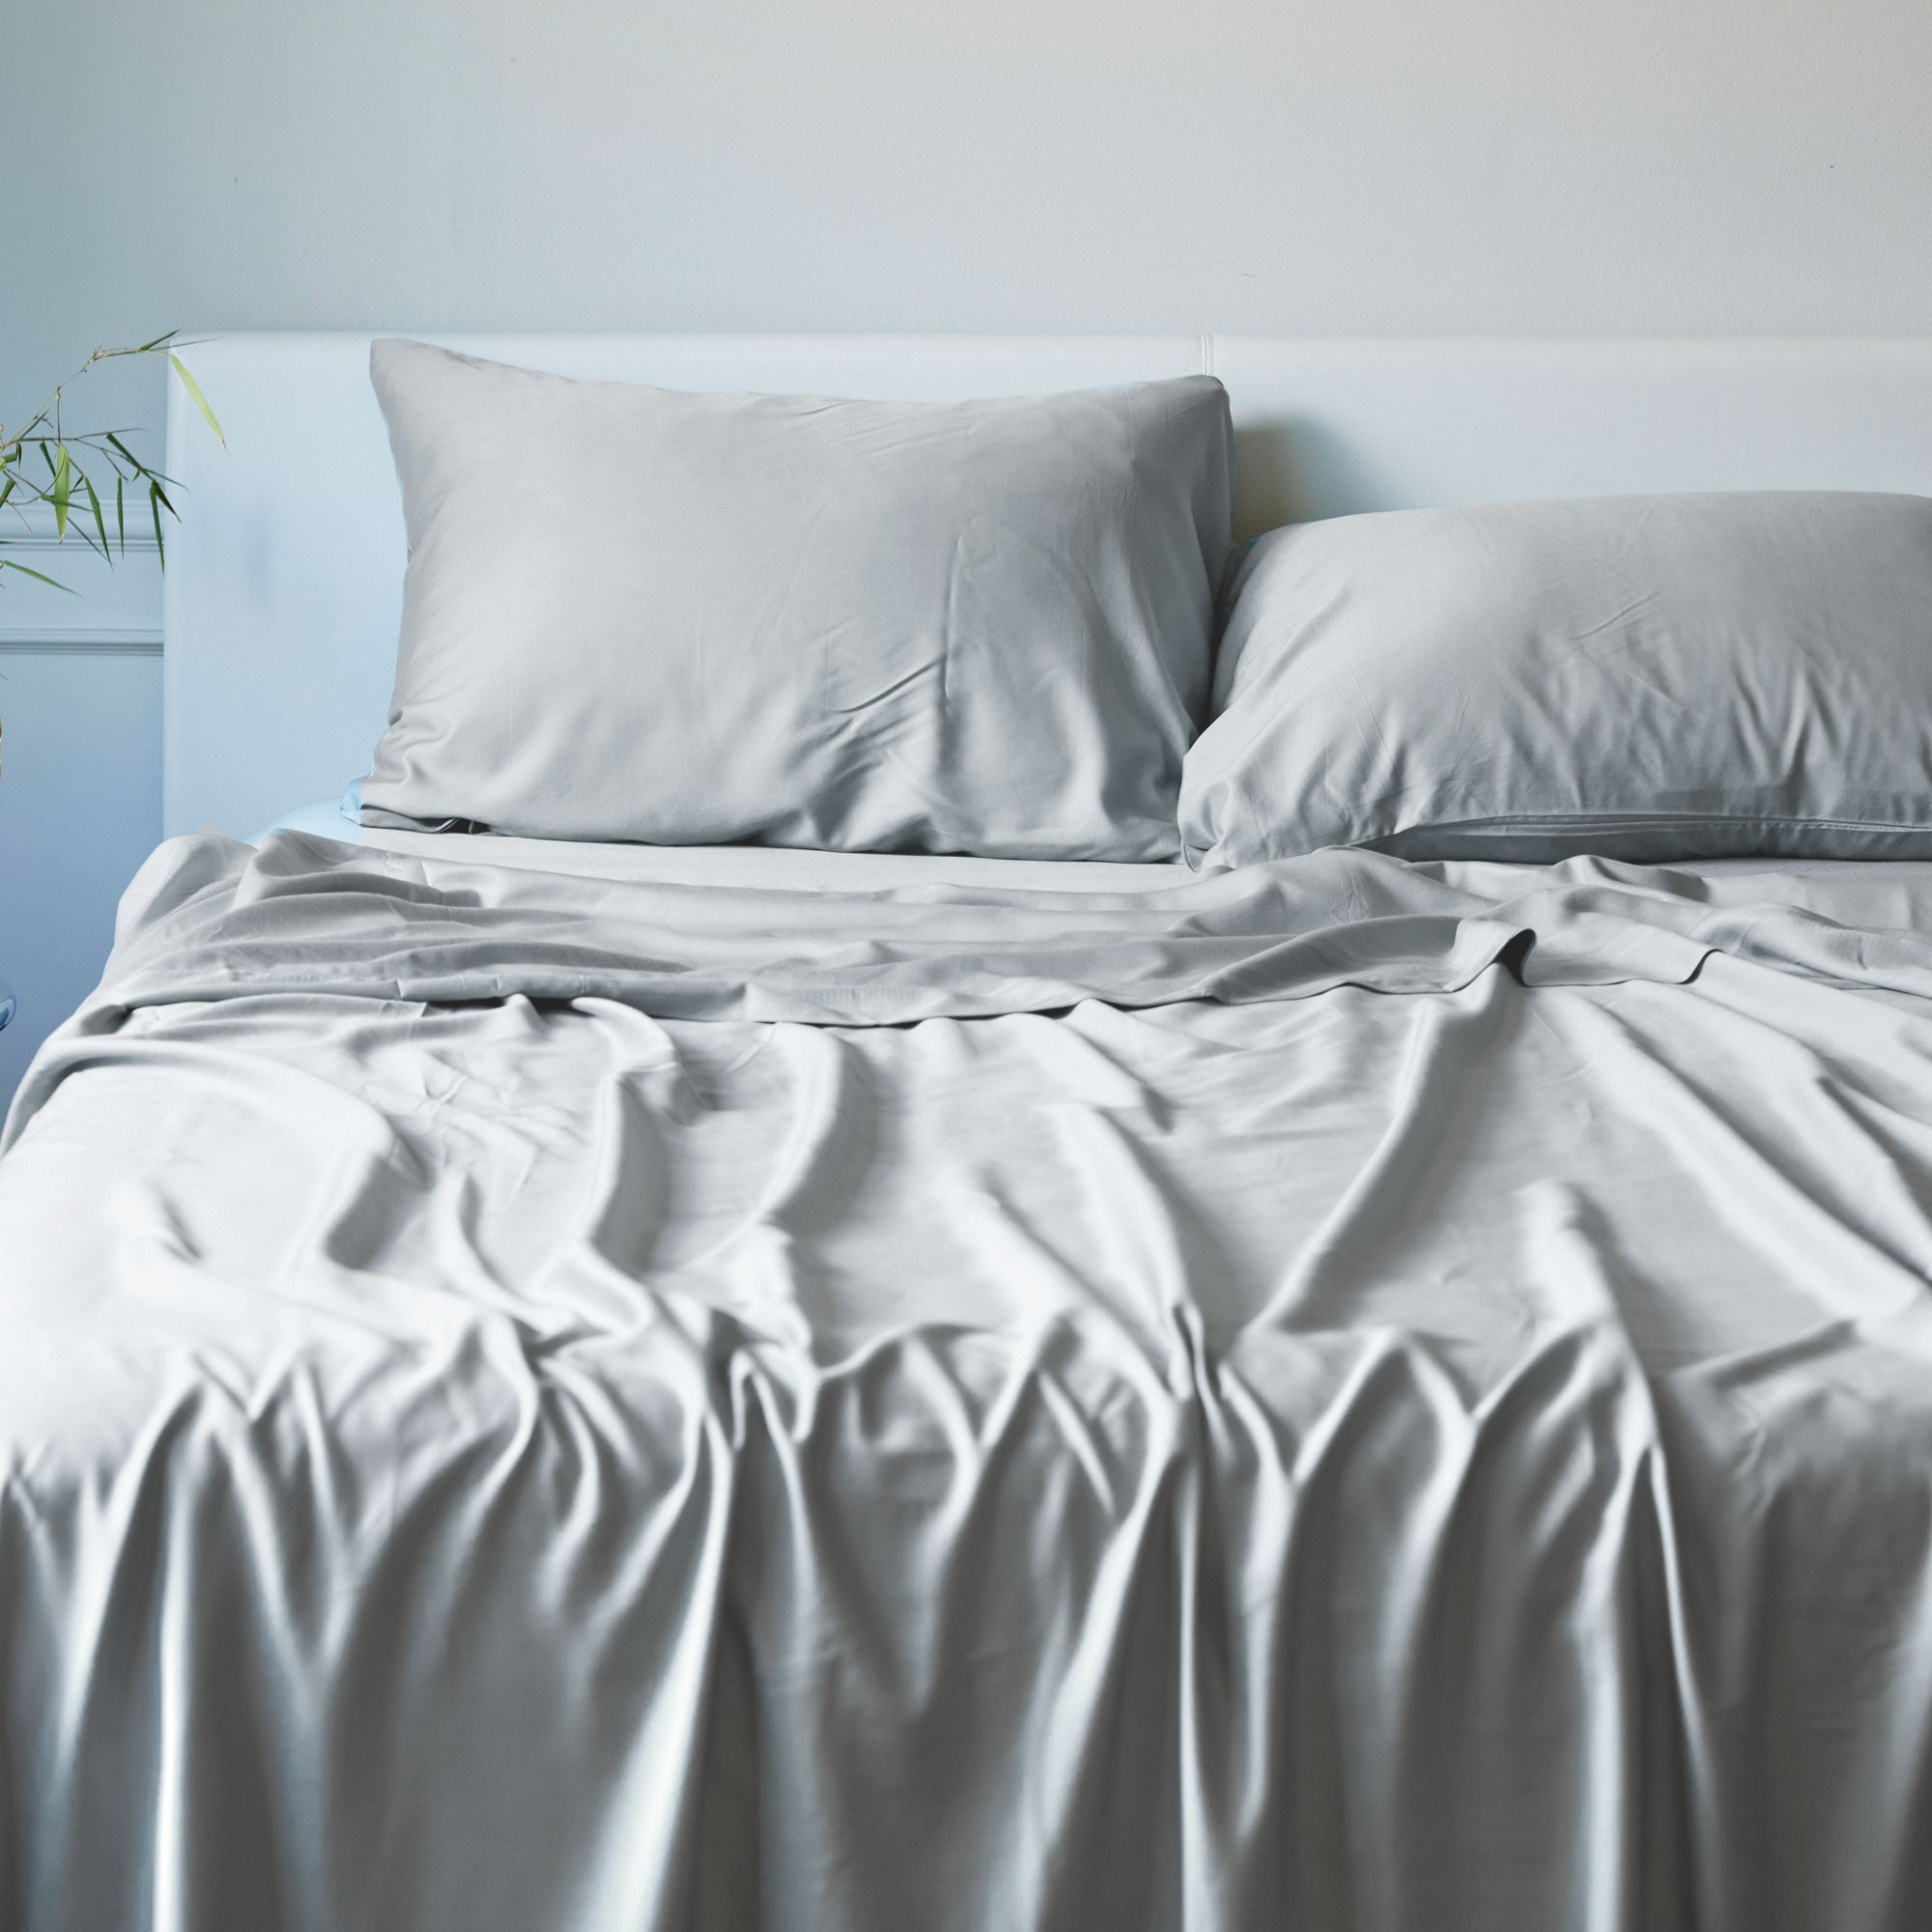 light gray bamboo bed sheets draped over a bed with pillows